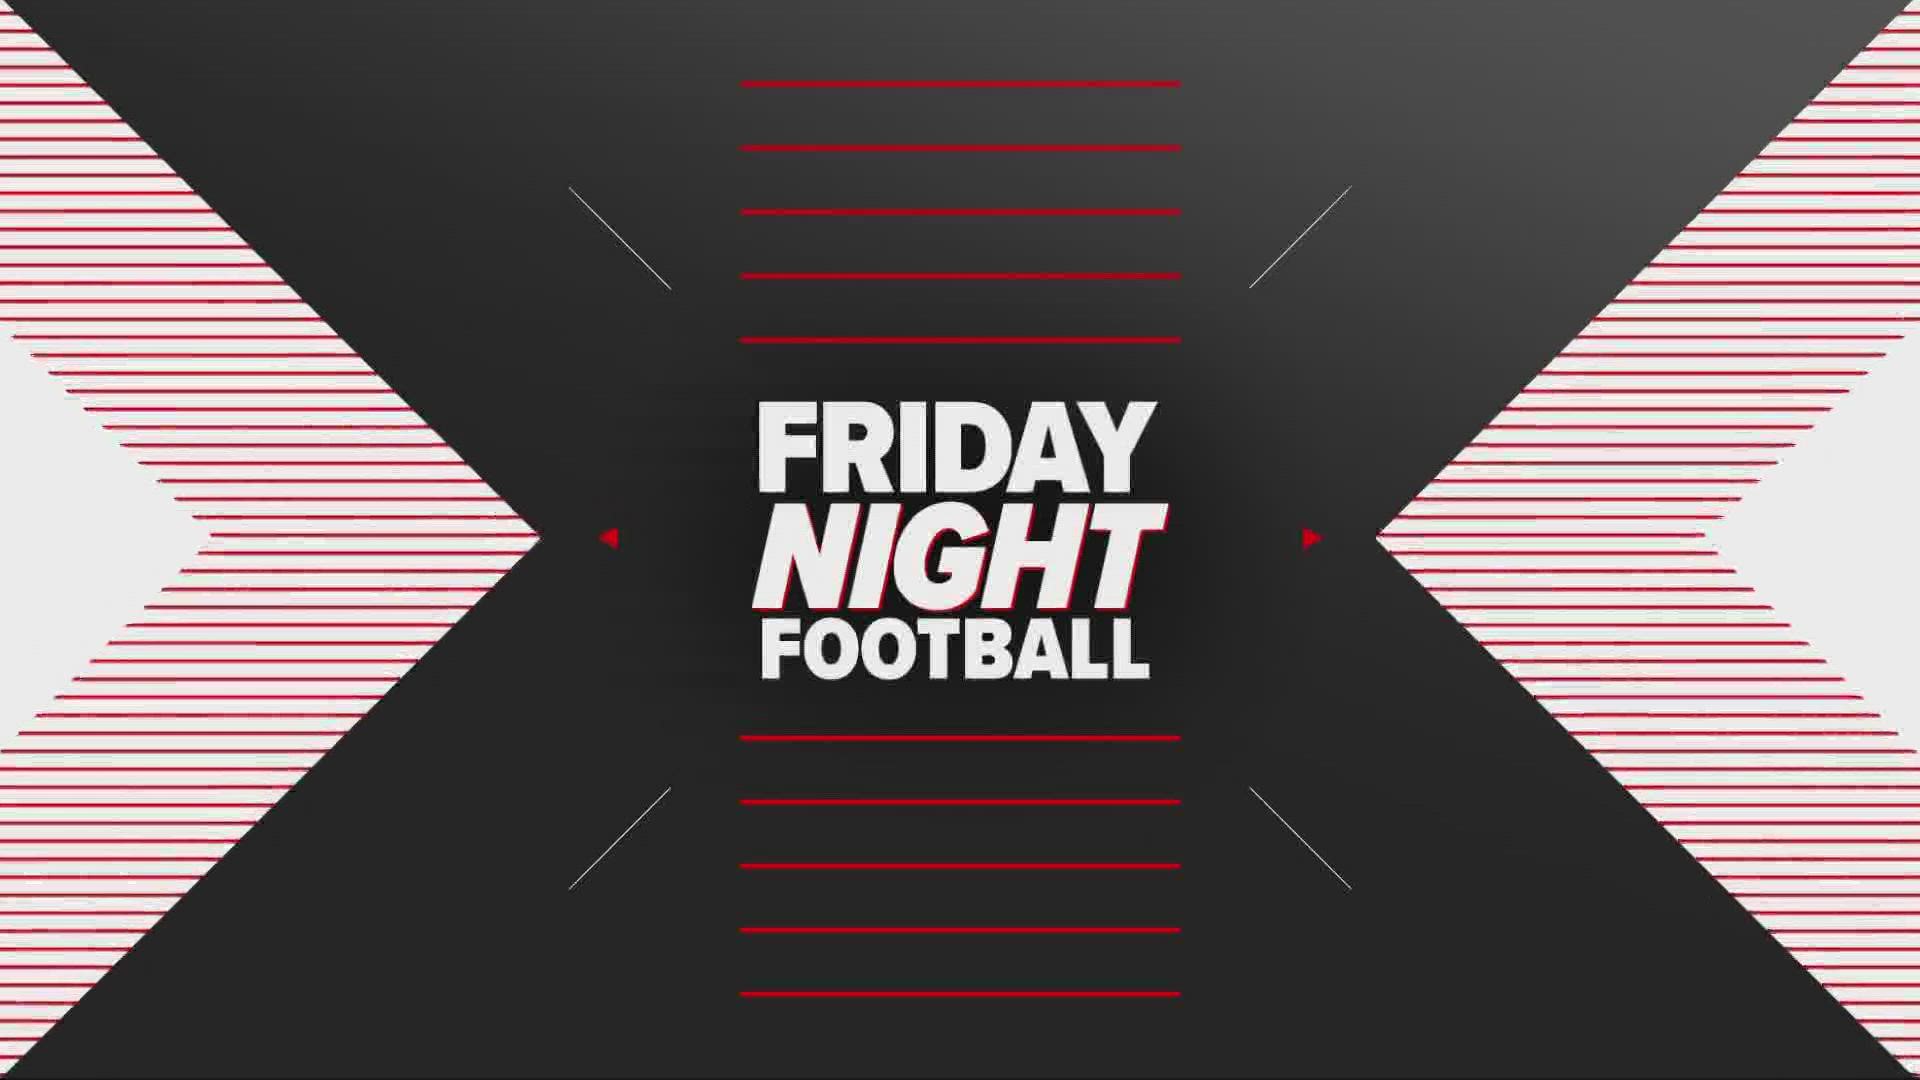 KTVB sports reporter Brady Frederick has all the highlights and final scores from Friday's prep football games from around the Treasure Valley.